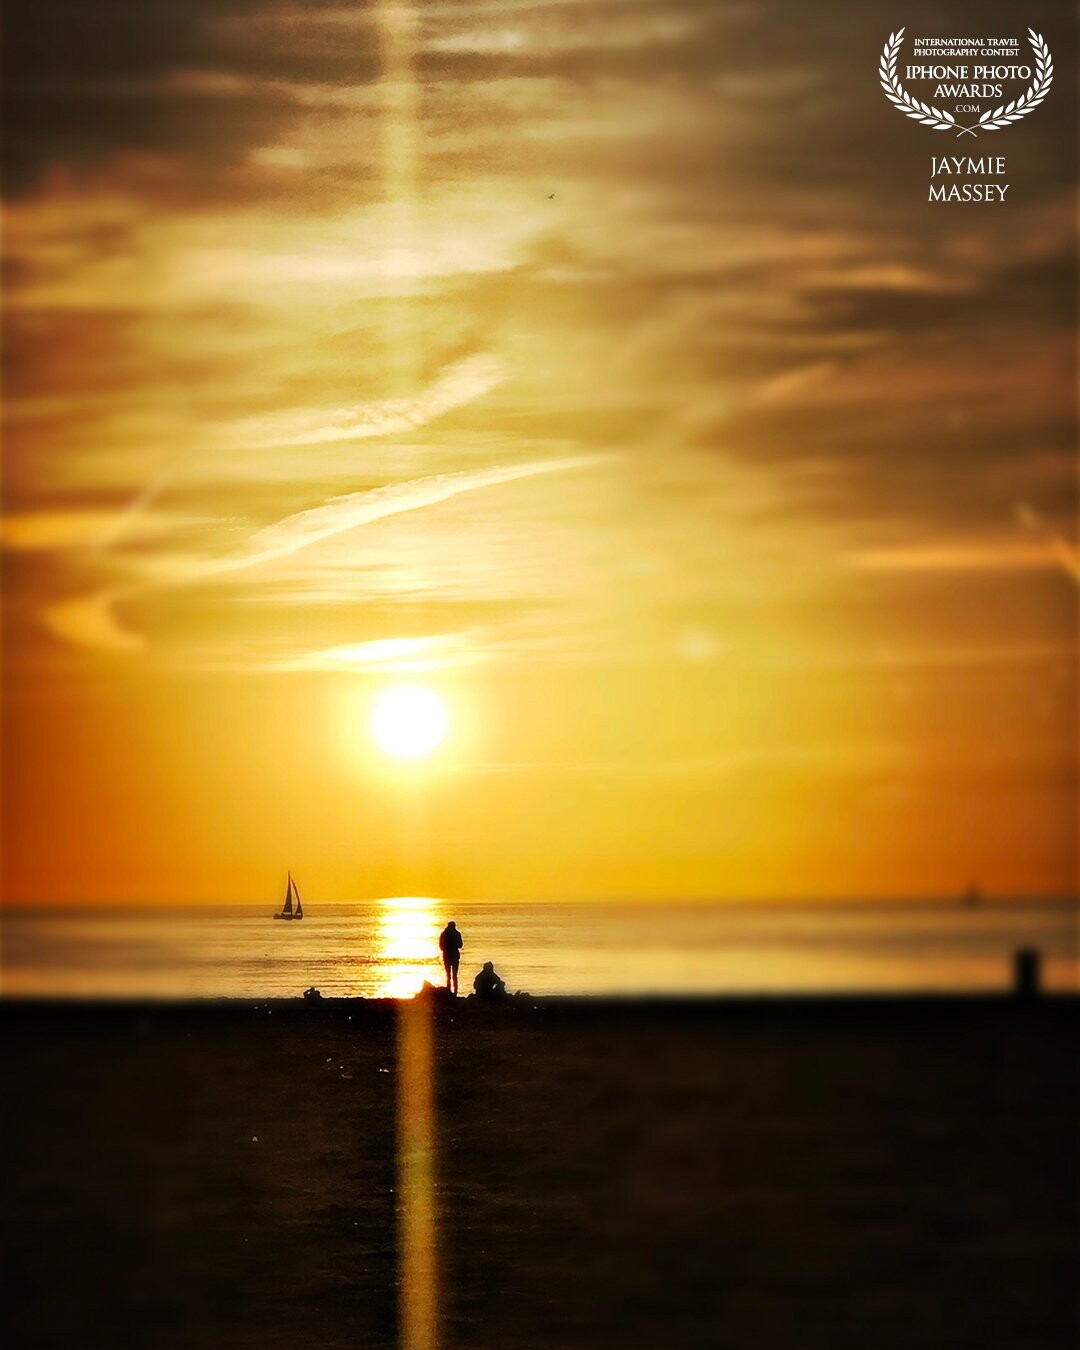 When the weather is nice people take advantage of a beautiful sunset. This beach, in The Hague, Netherlands attracts people from all over to also enjoy its restaurants and shops.